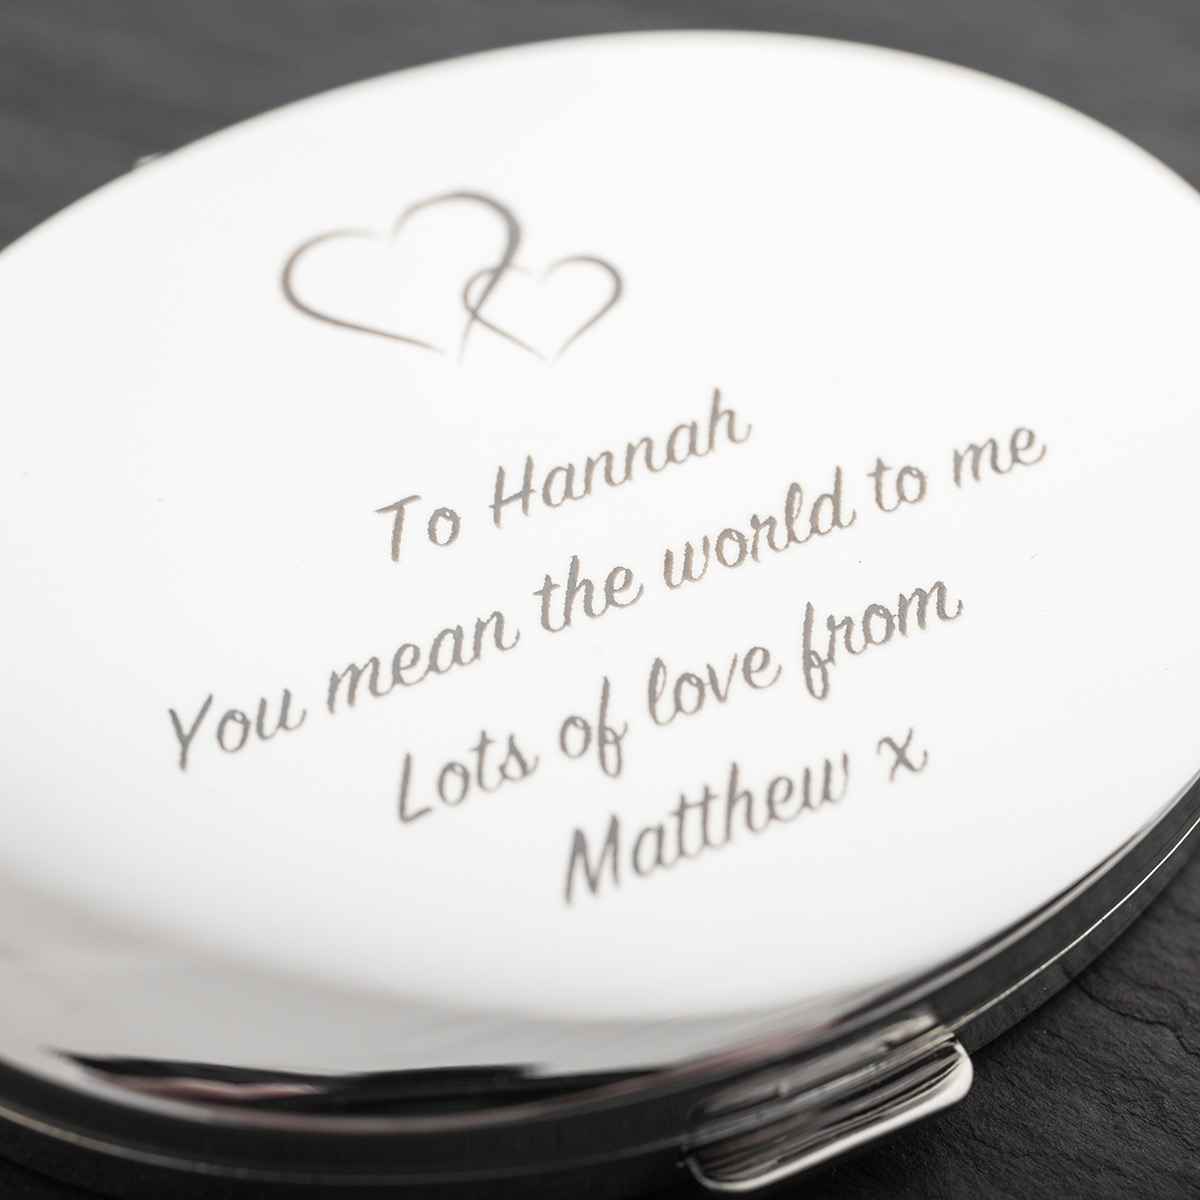 Engraved Silver Oval Compact Mirror With Hearts